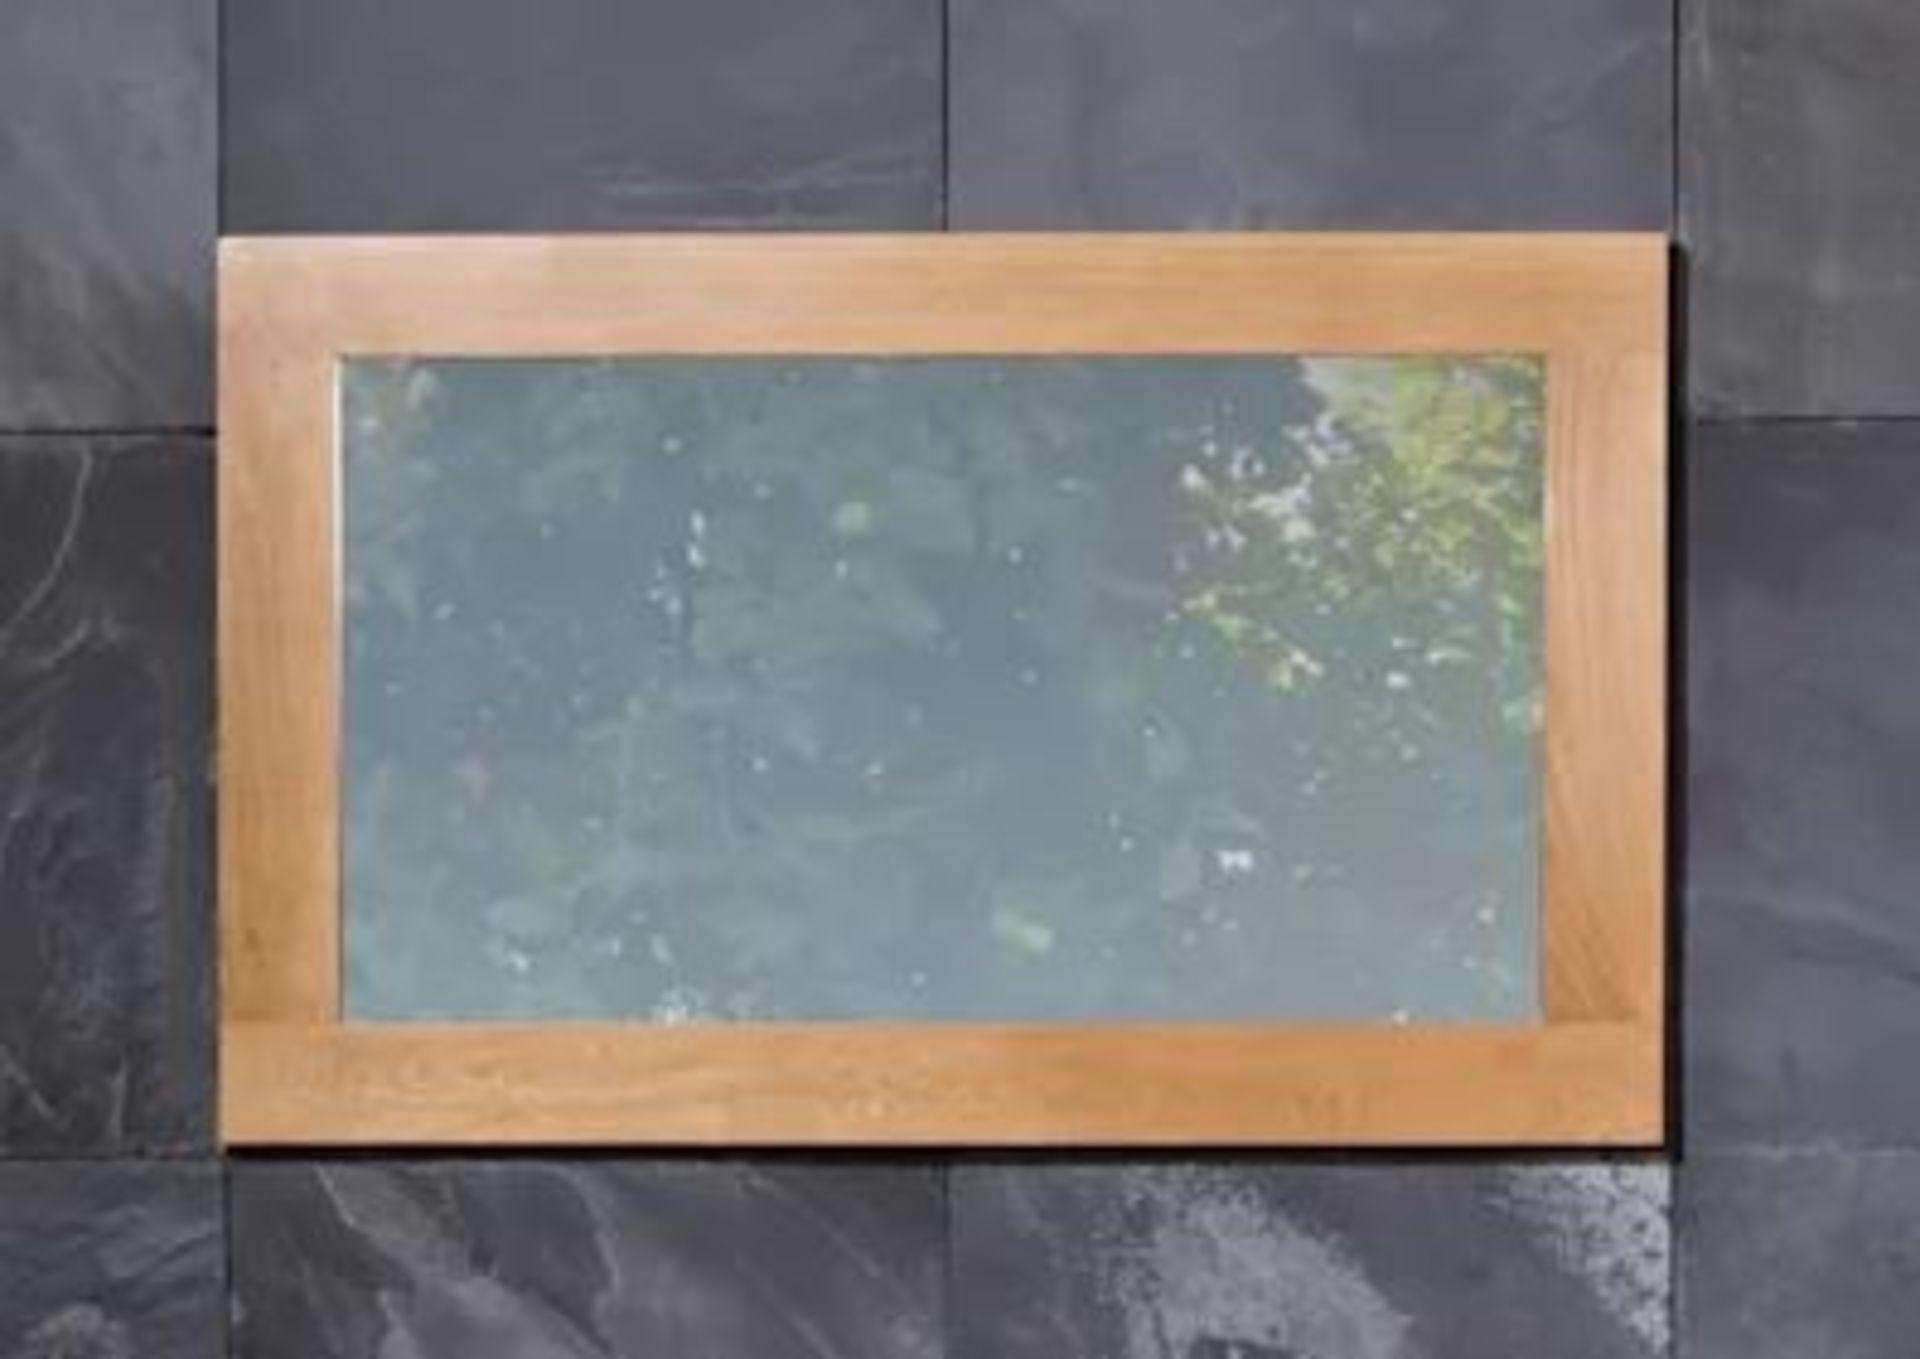 1 x Stonearth Medium Wall Mirror Frame - American Solid Oak Frame For Mirrors or Pictures - Image 10 of 12